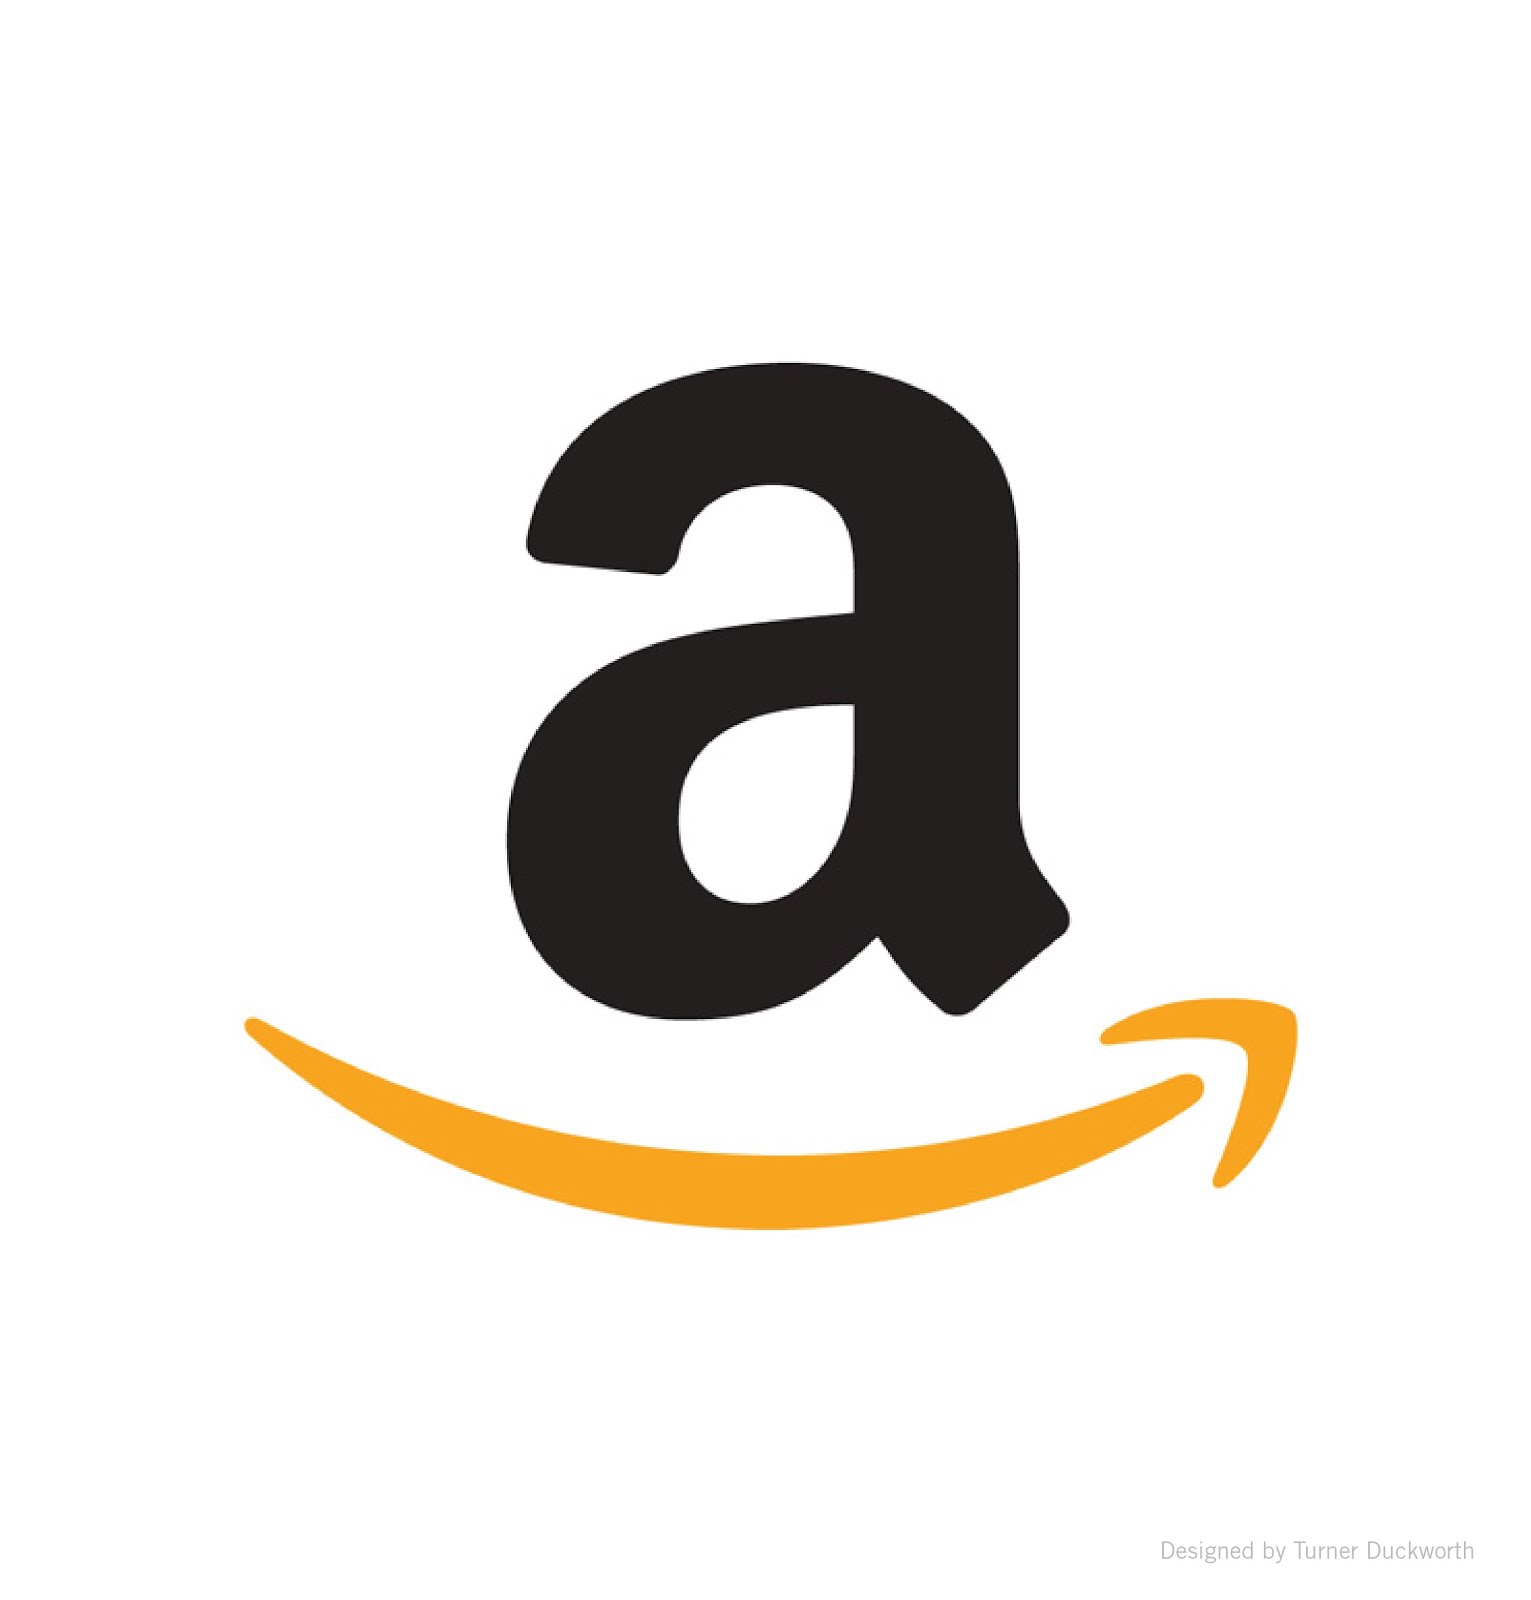 AMAZON - SIGN IN